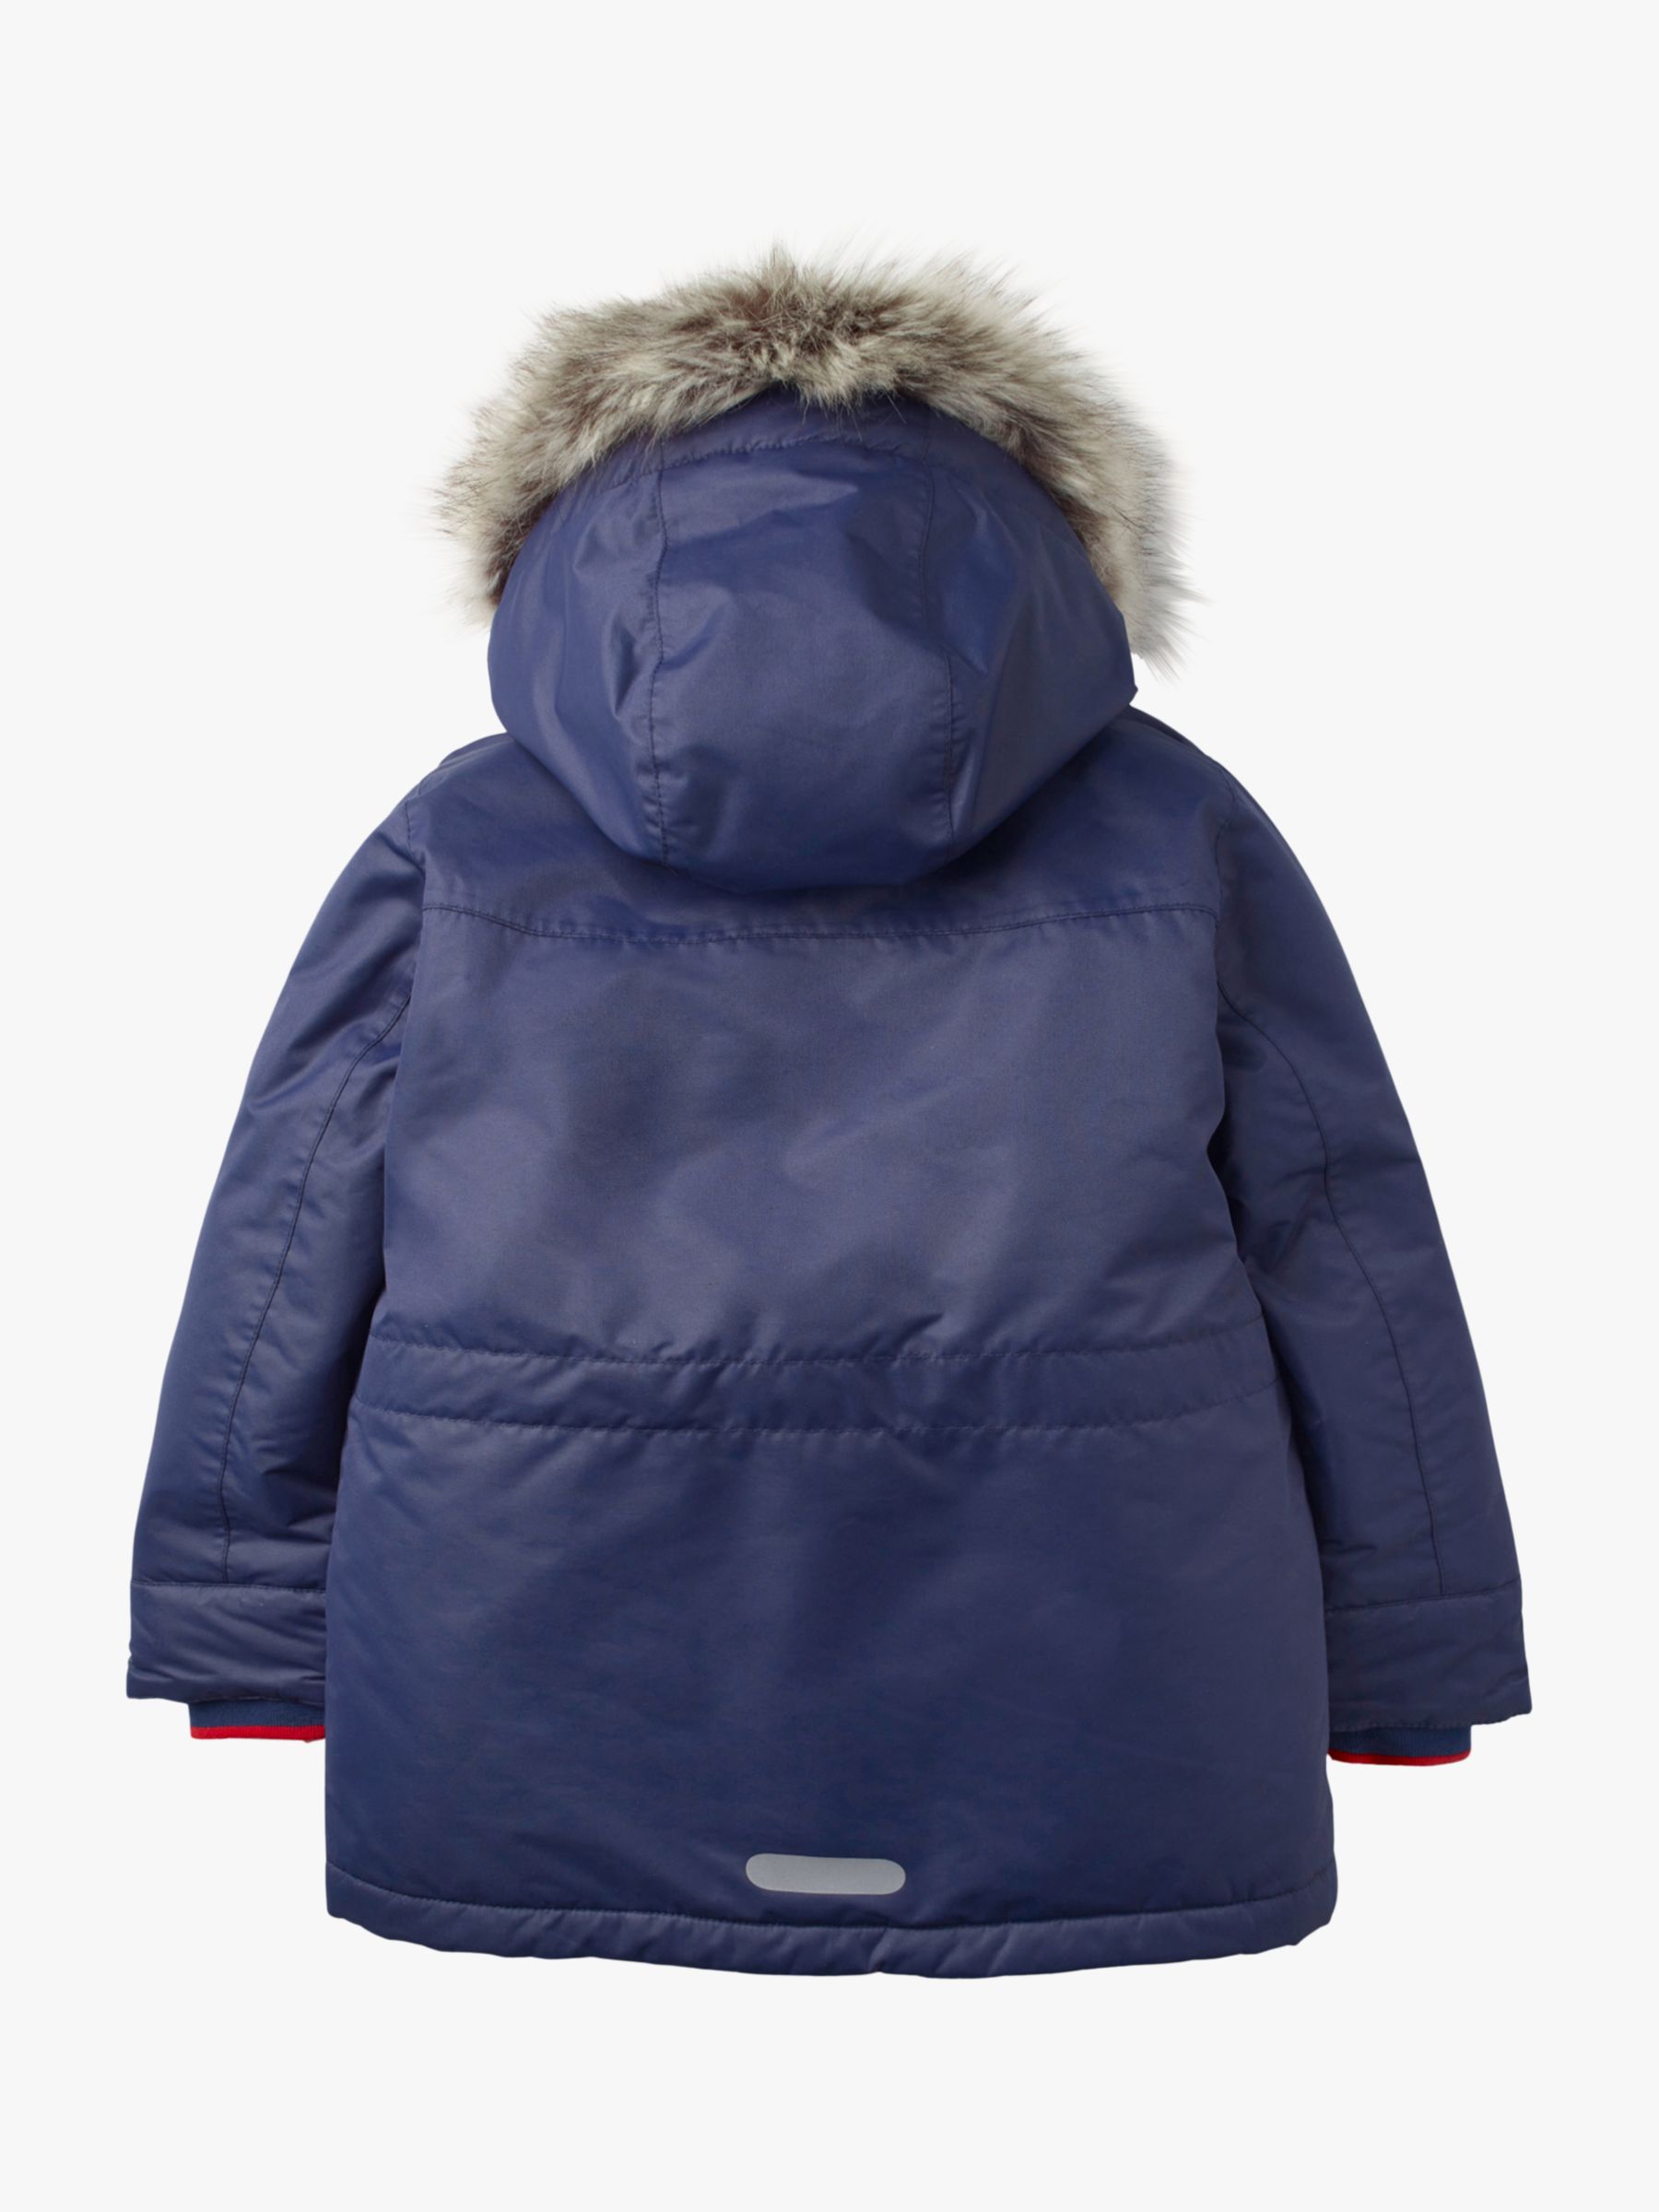 Mini Boden Boys' Cosy Waterproof Parka, College Navy at John Lewis ...